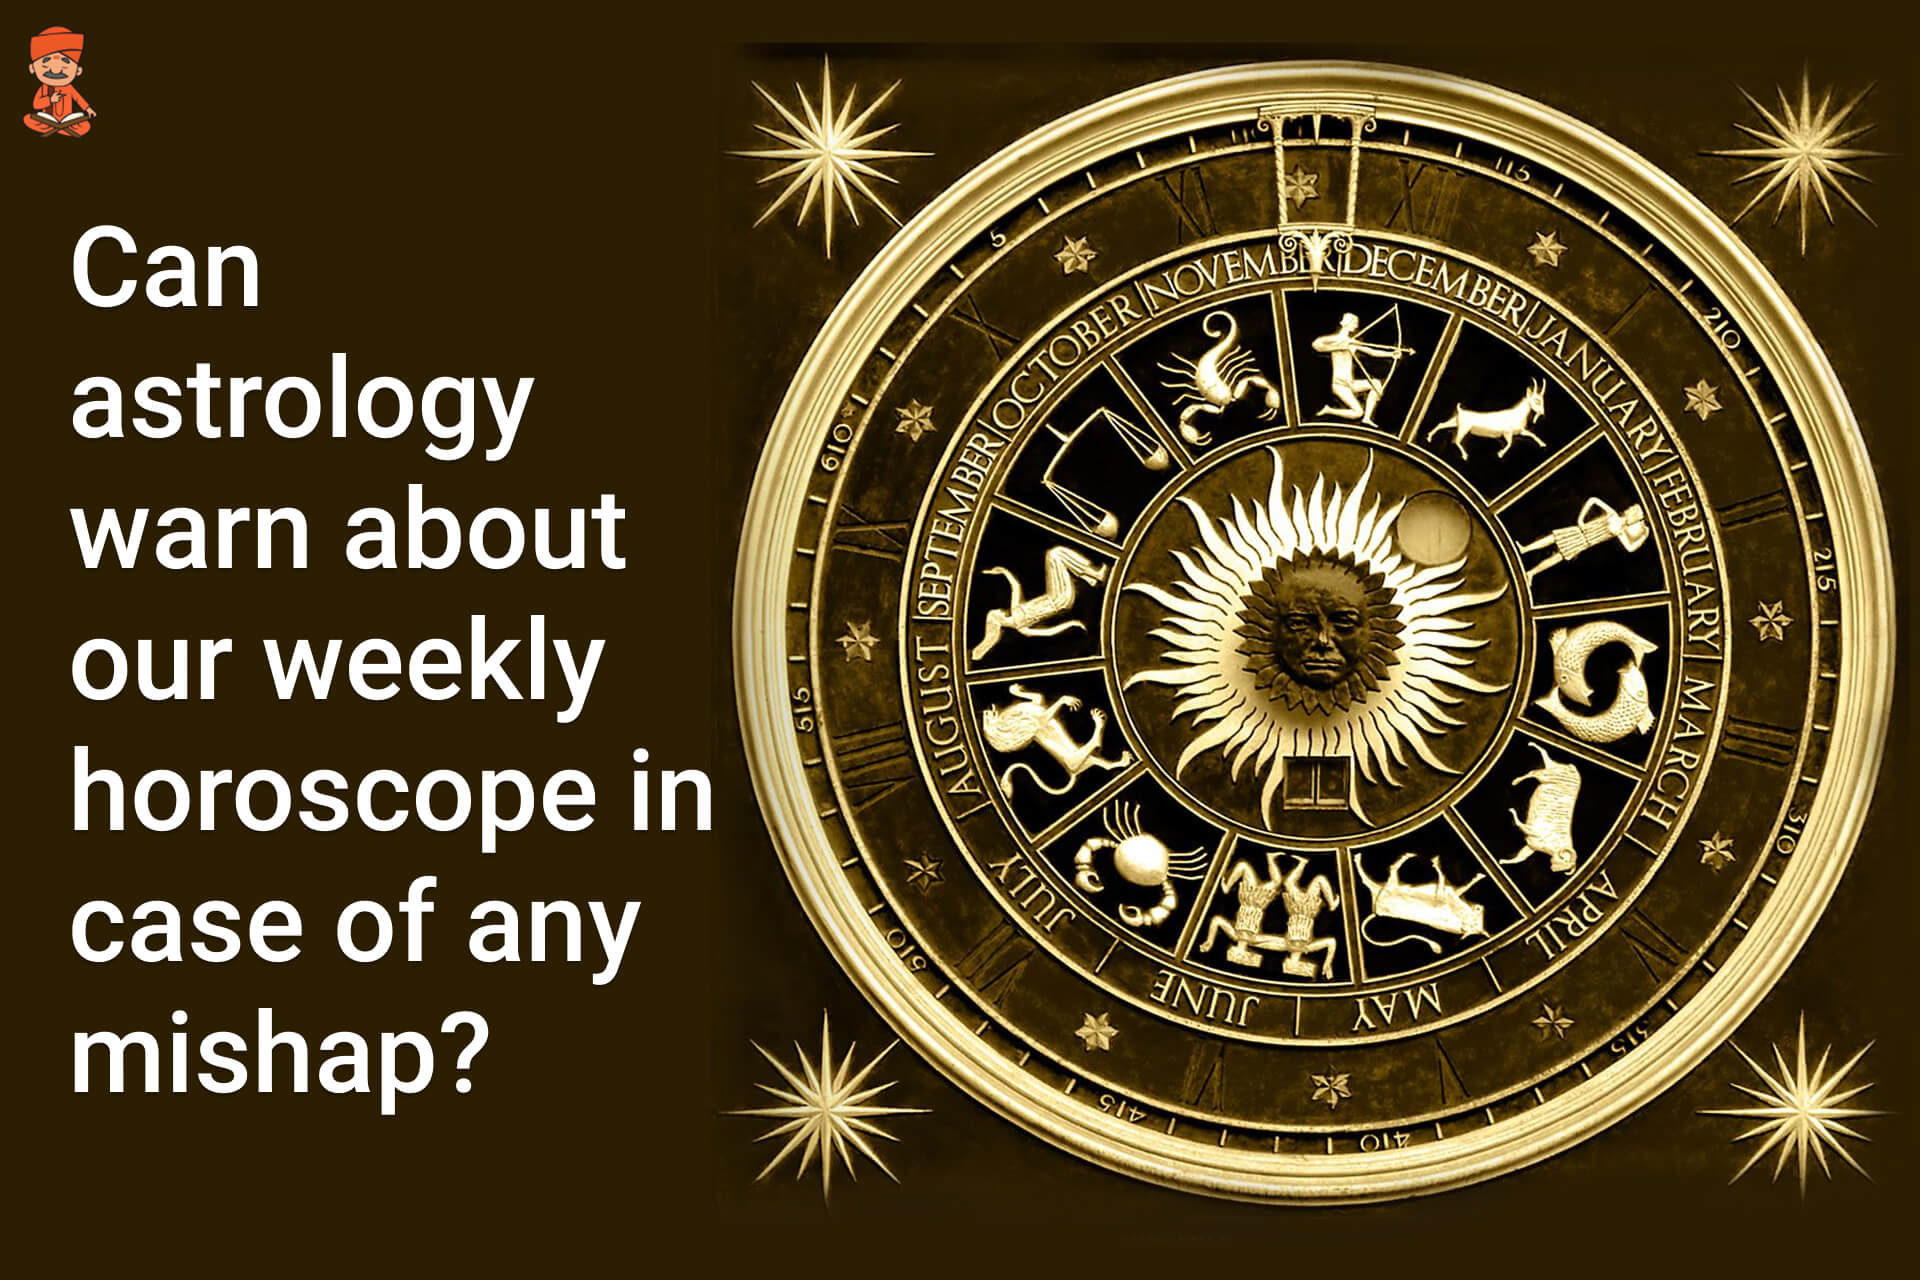 Can Astrology Warn About Our Weekly Horoscope In Case Of Any Mishap?